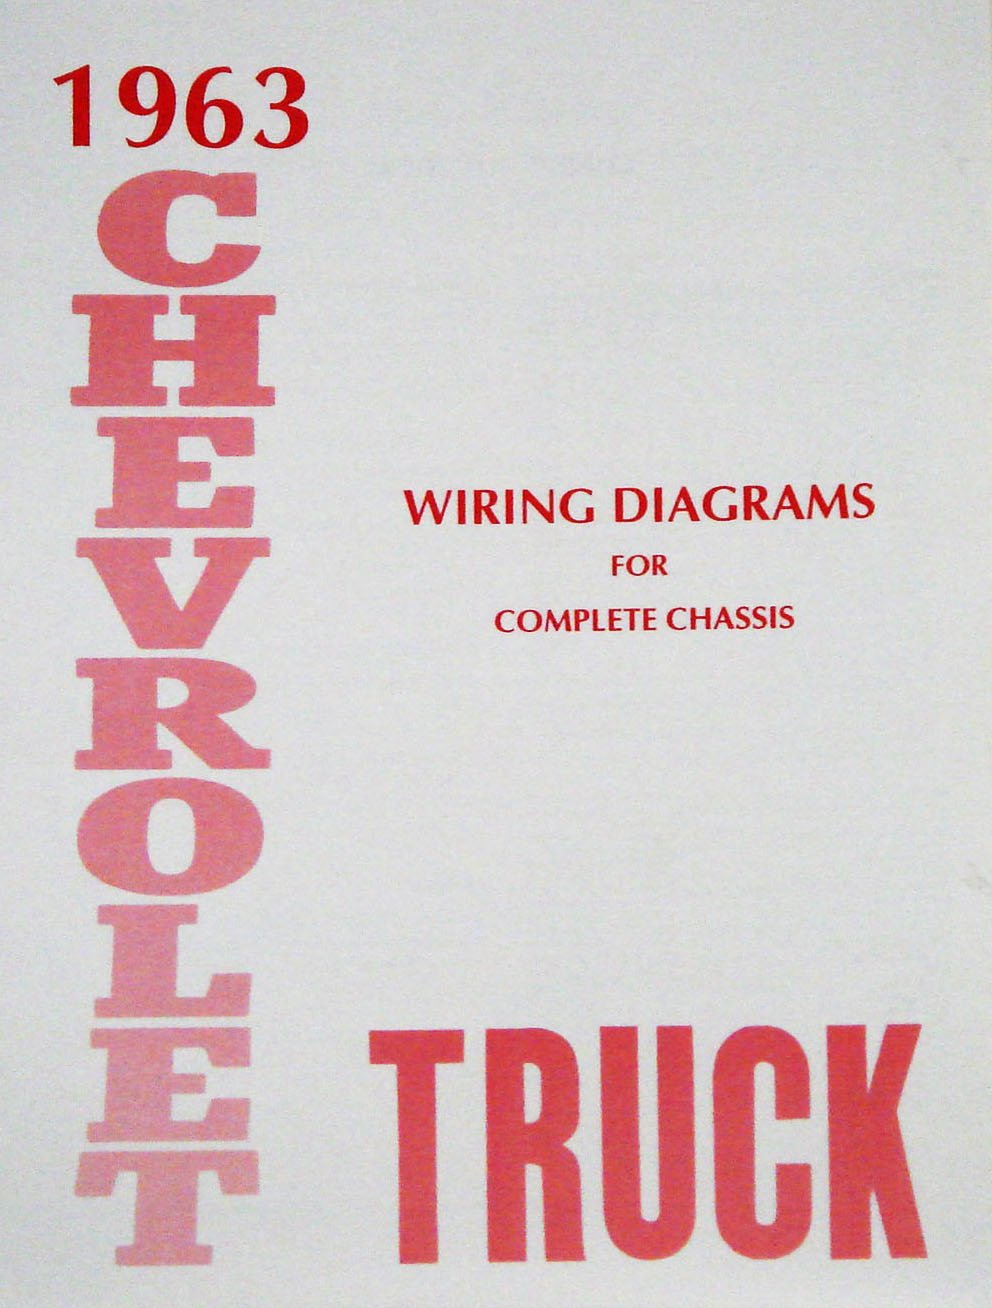 Wiring Diagram Manual for 1963 Chevrolet Truck